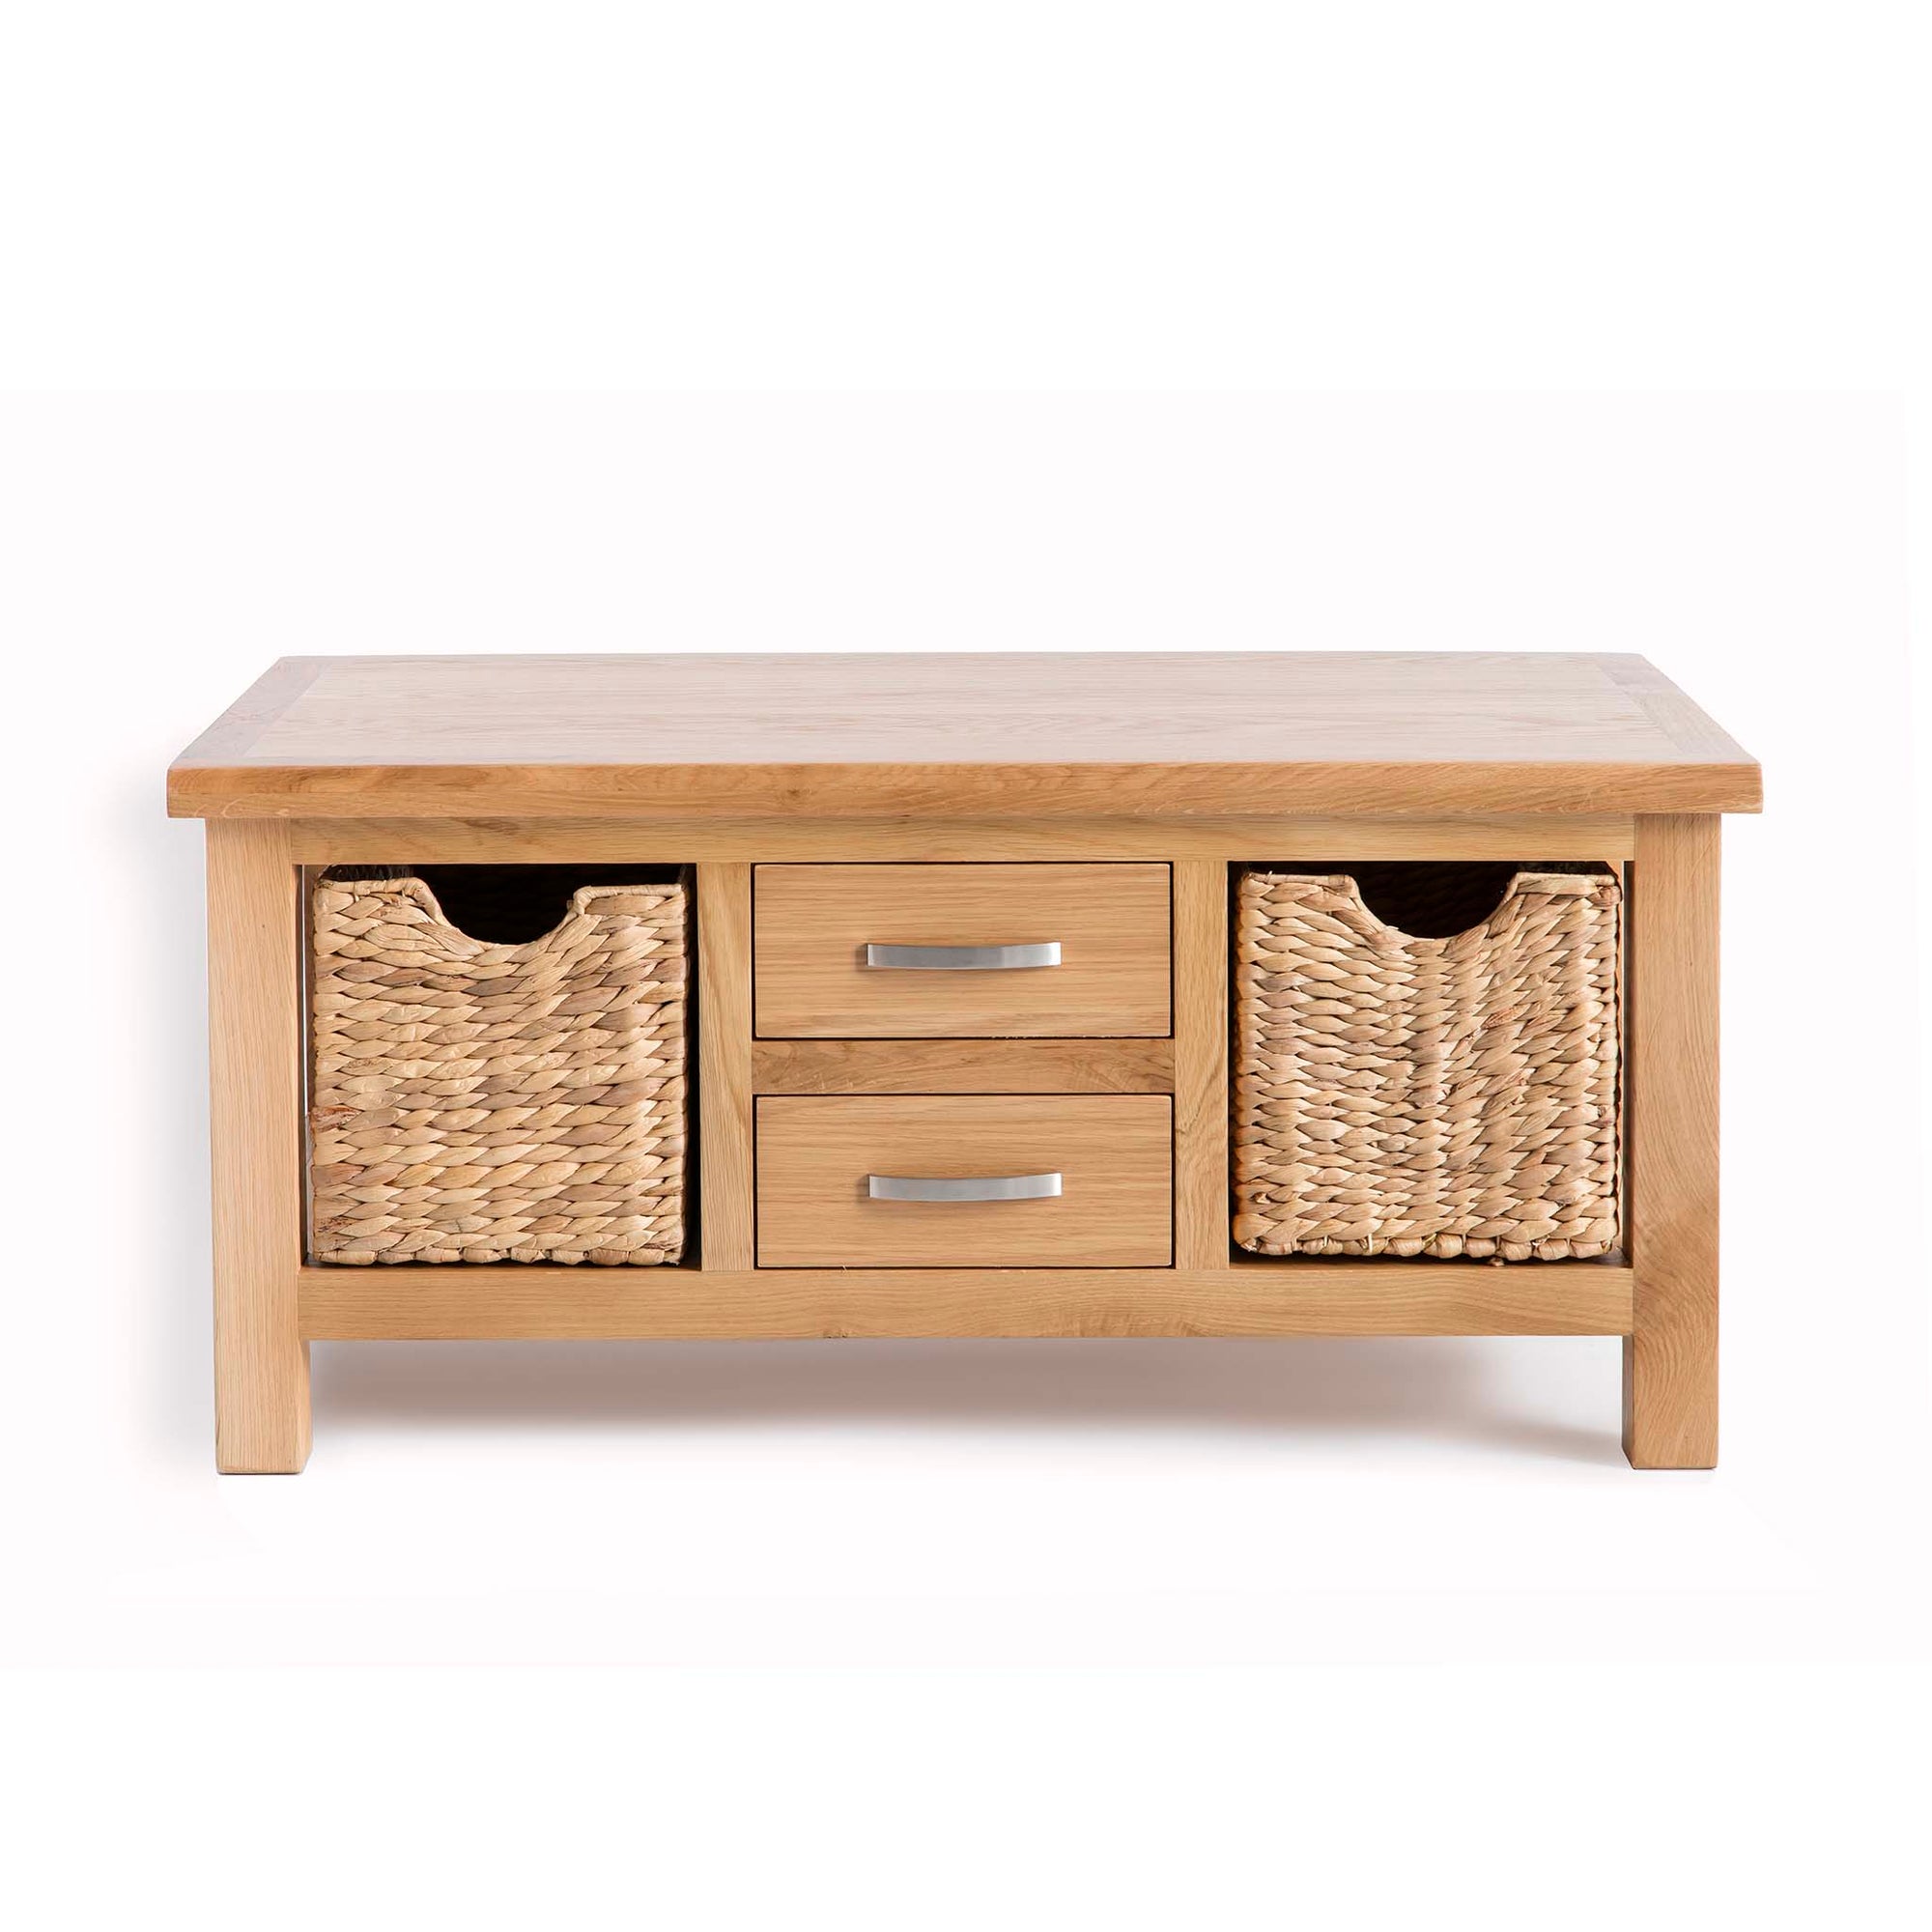 London Oak Large Coffee Table With Drawers Baskets